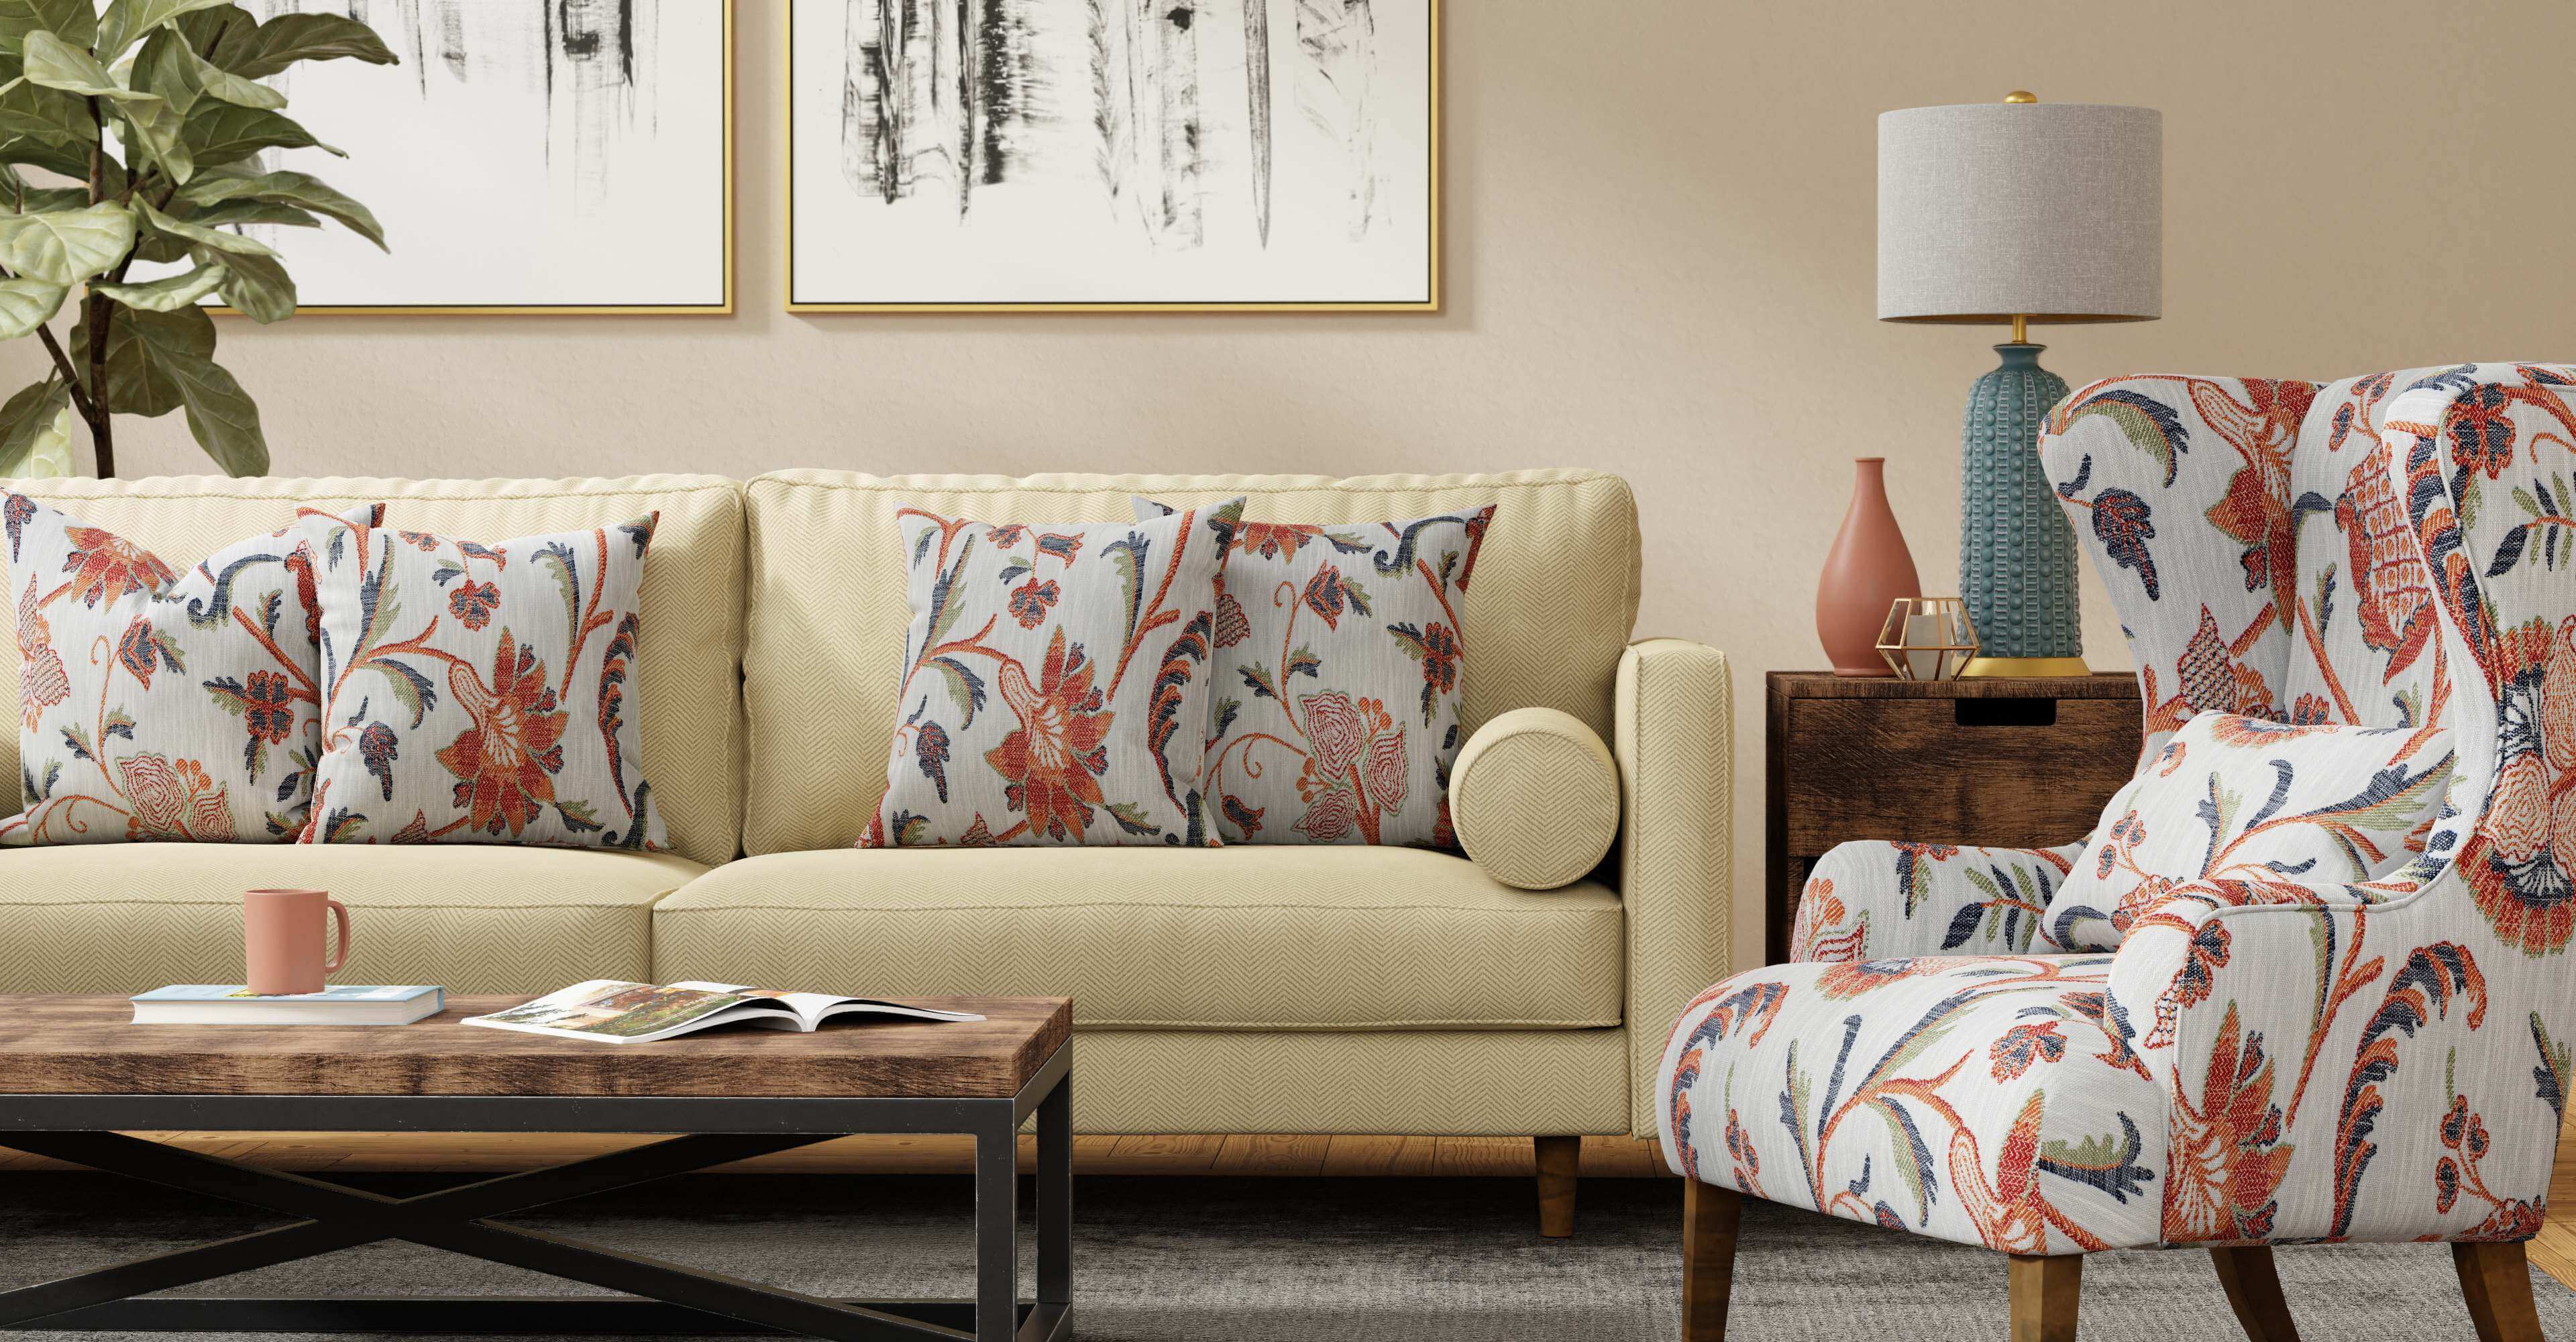 Yellow couch with floral patterns and floral pattered accent chair in 3D lifestyle template made with imagine.io